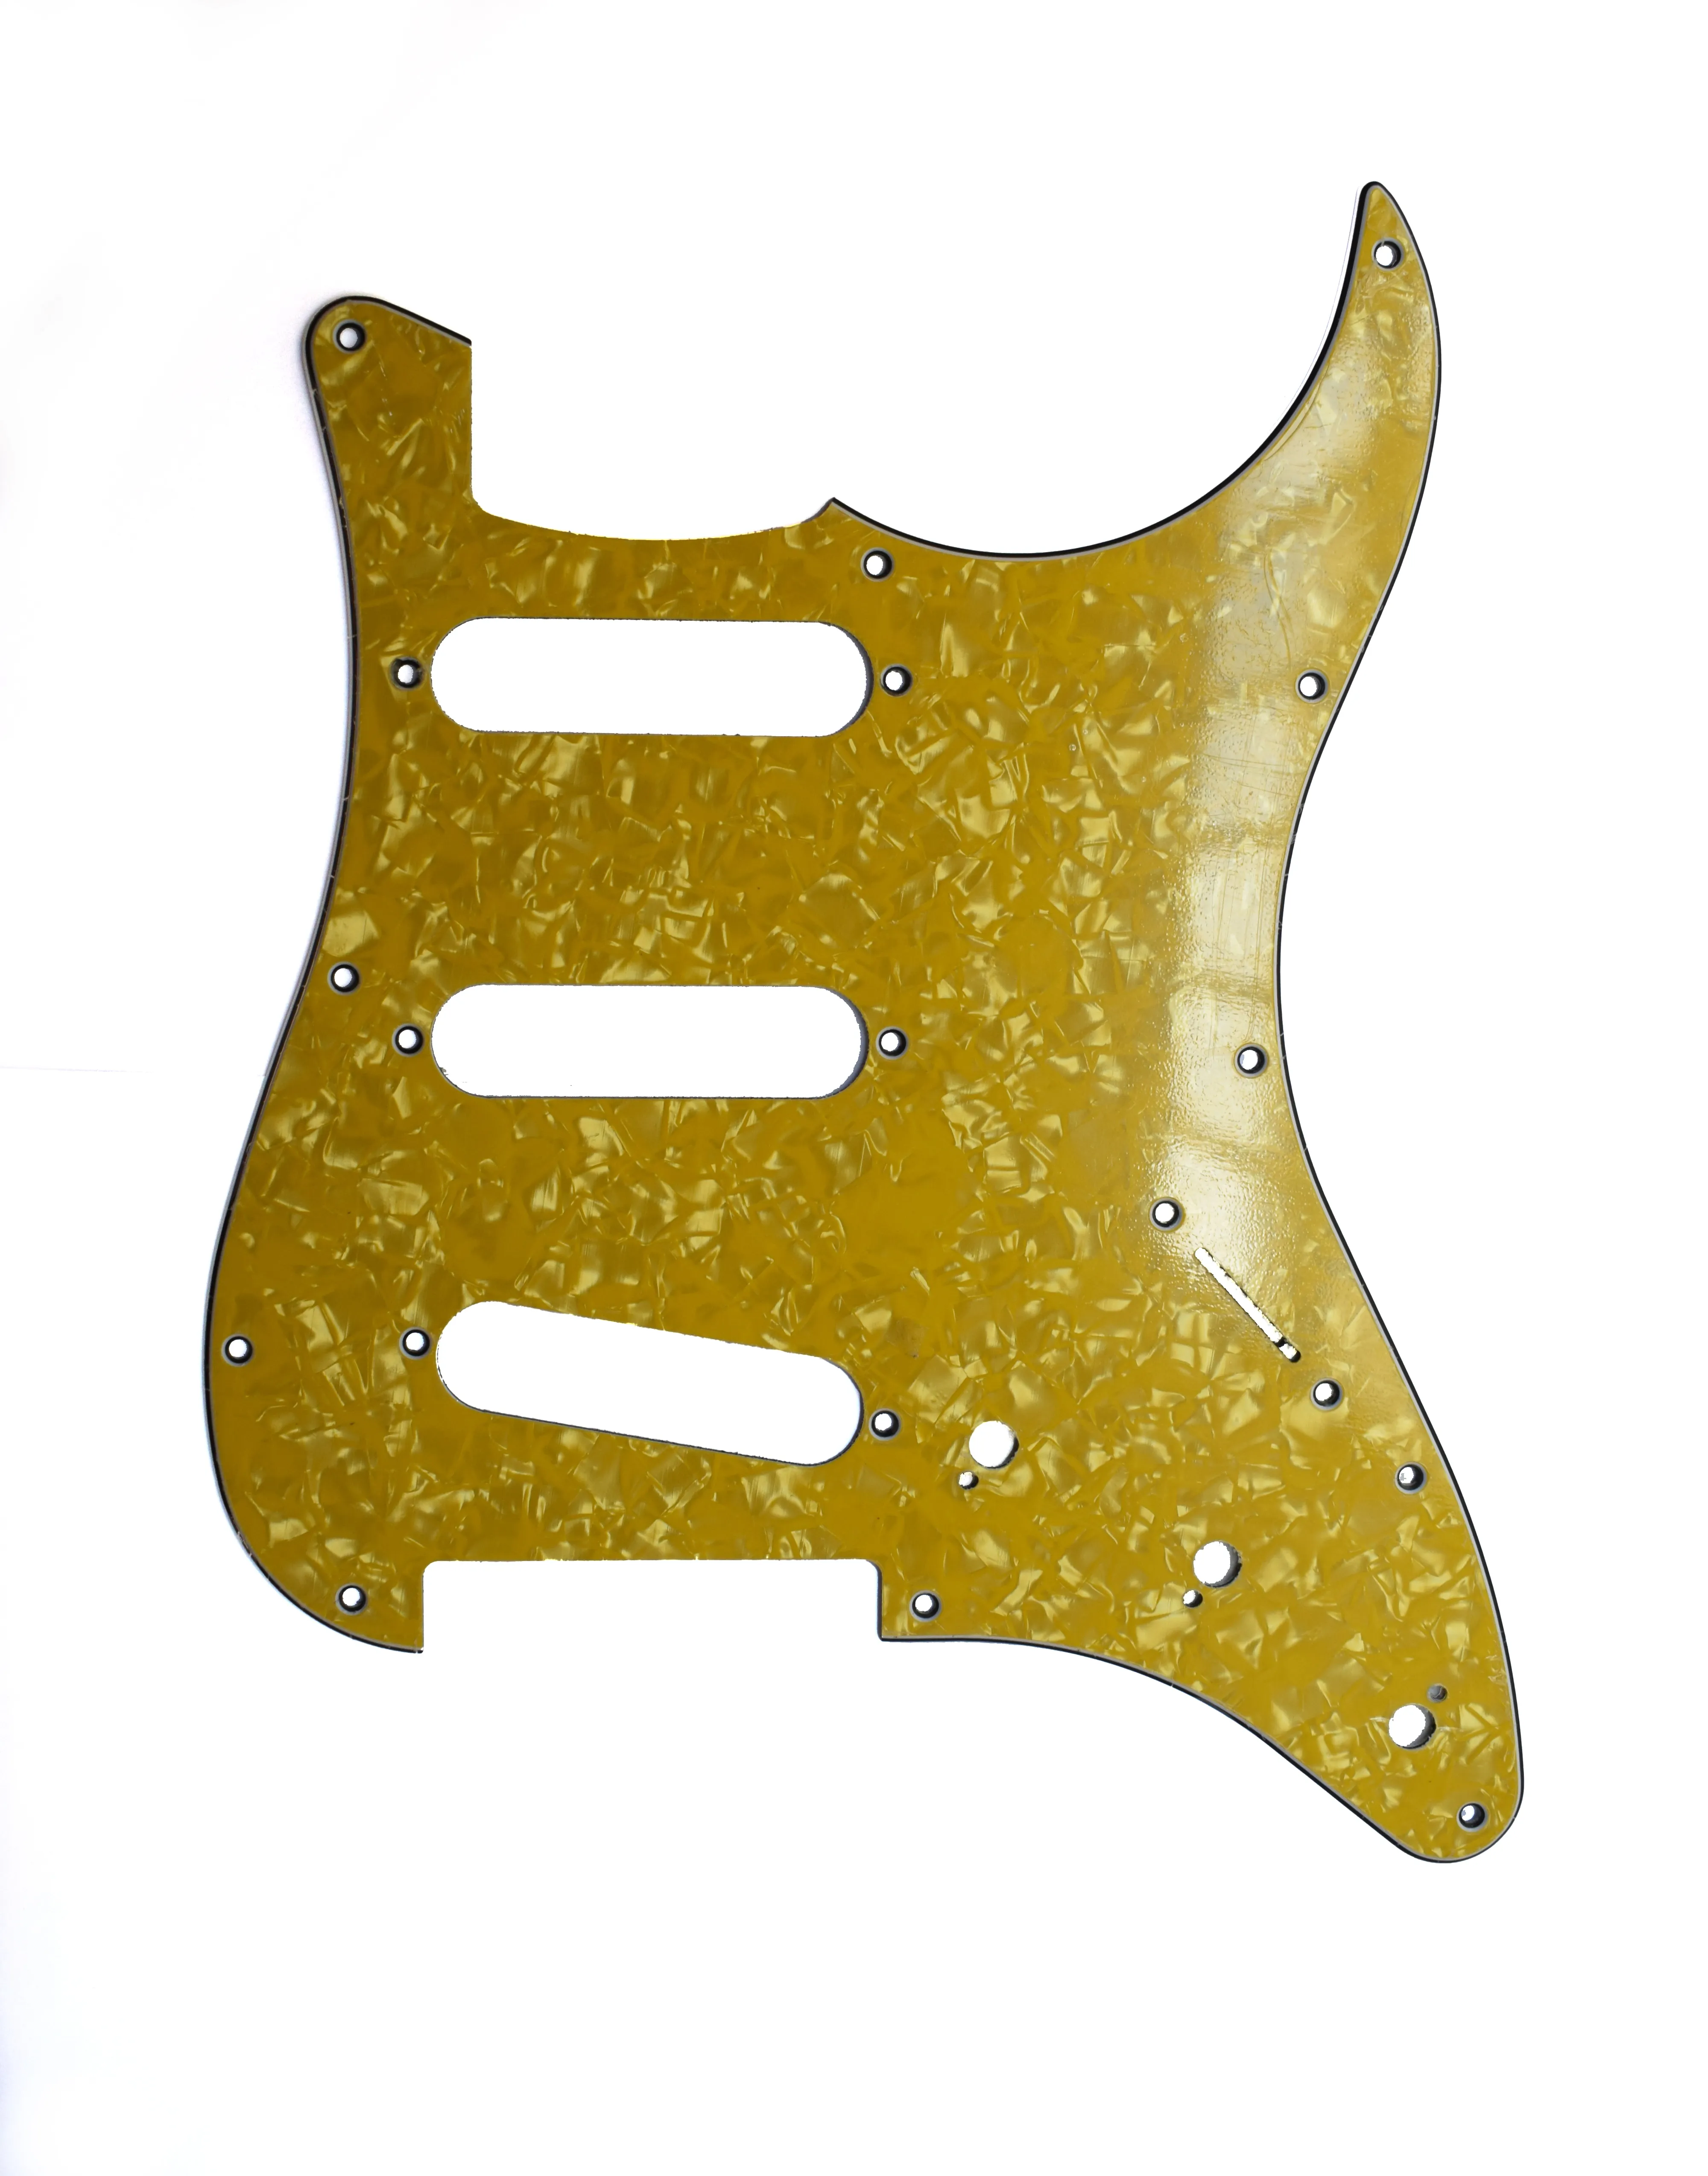 3Ply USA Vintage 11 Hole ST Start Guitar Pickguard Scratch Plate For FD ST Eight Colors Options